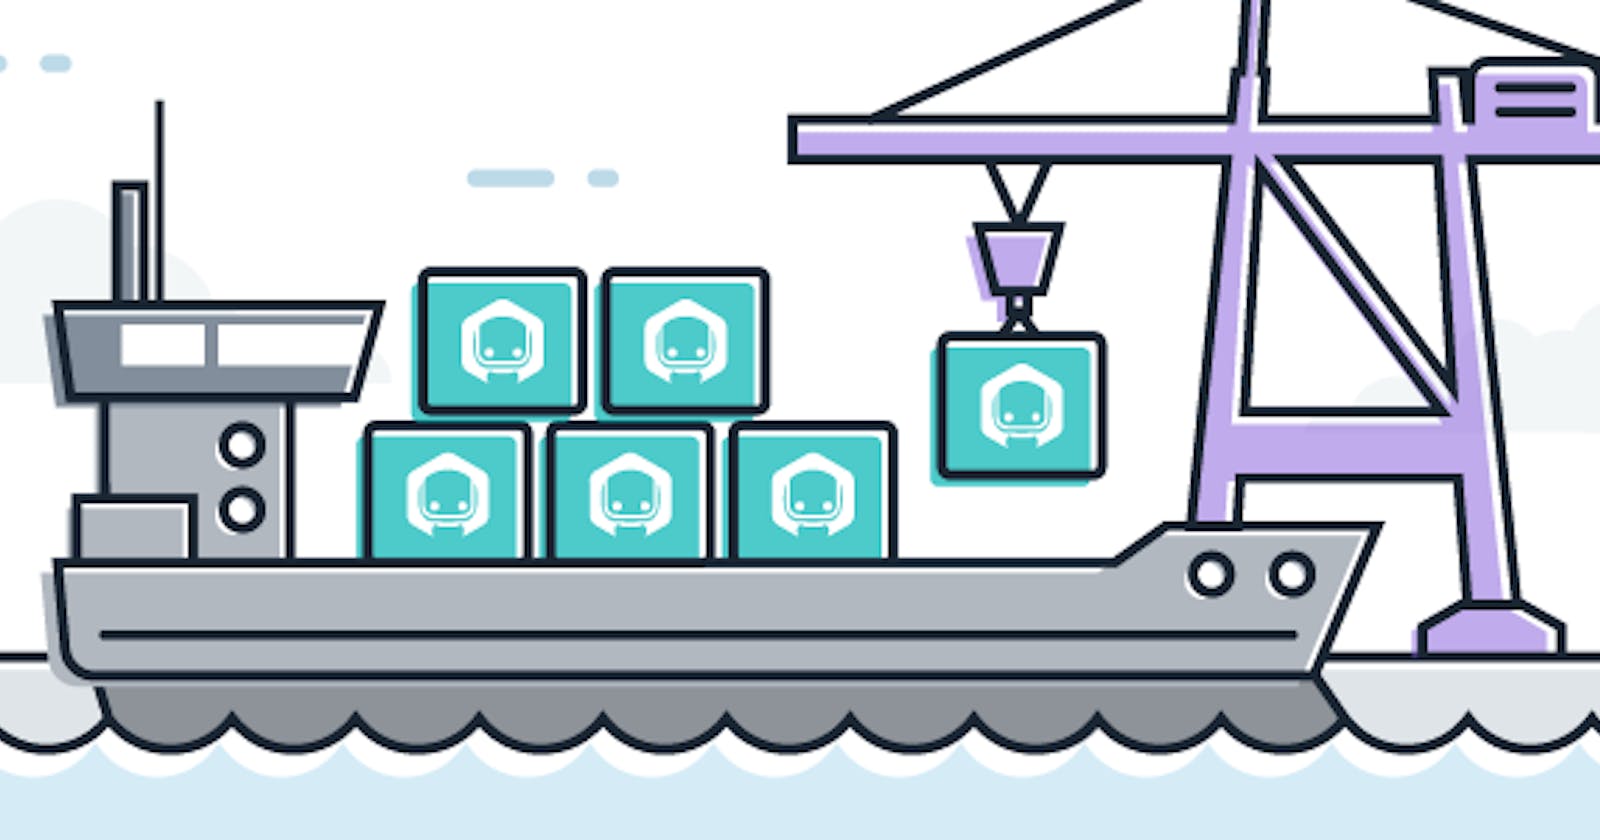 Lessons Learned from Dockerizing our Applications